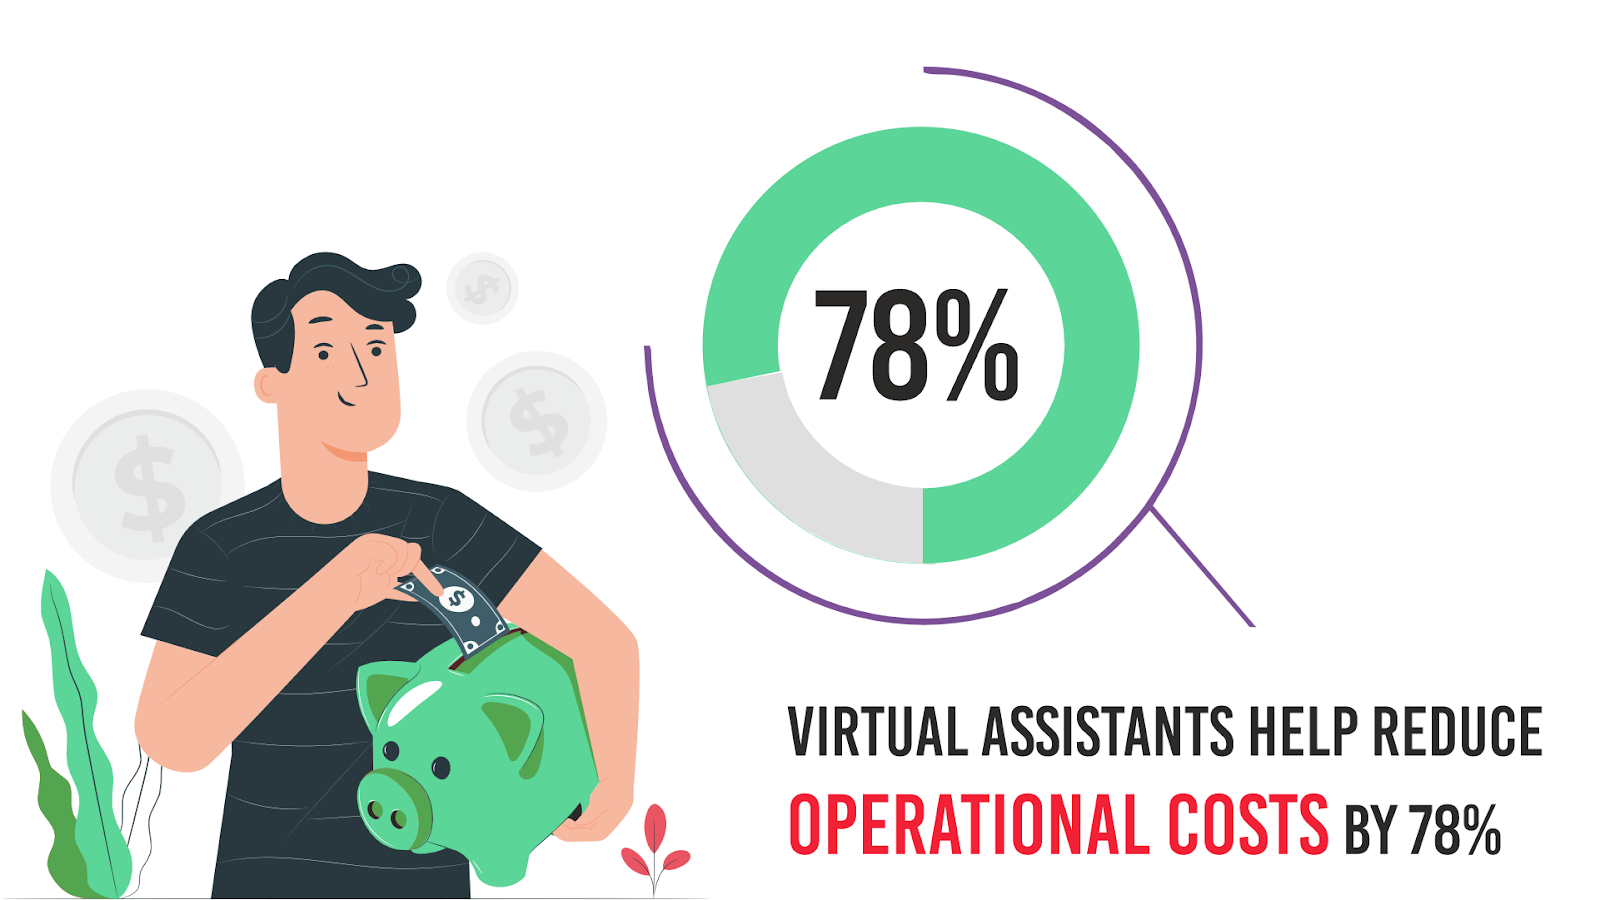 How a Virtual Assistant Can Help Reduce Costs